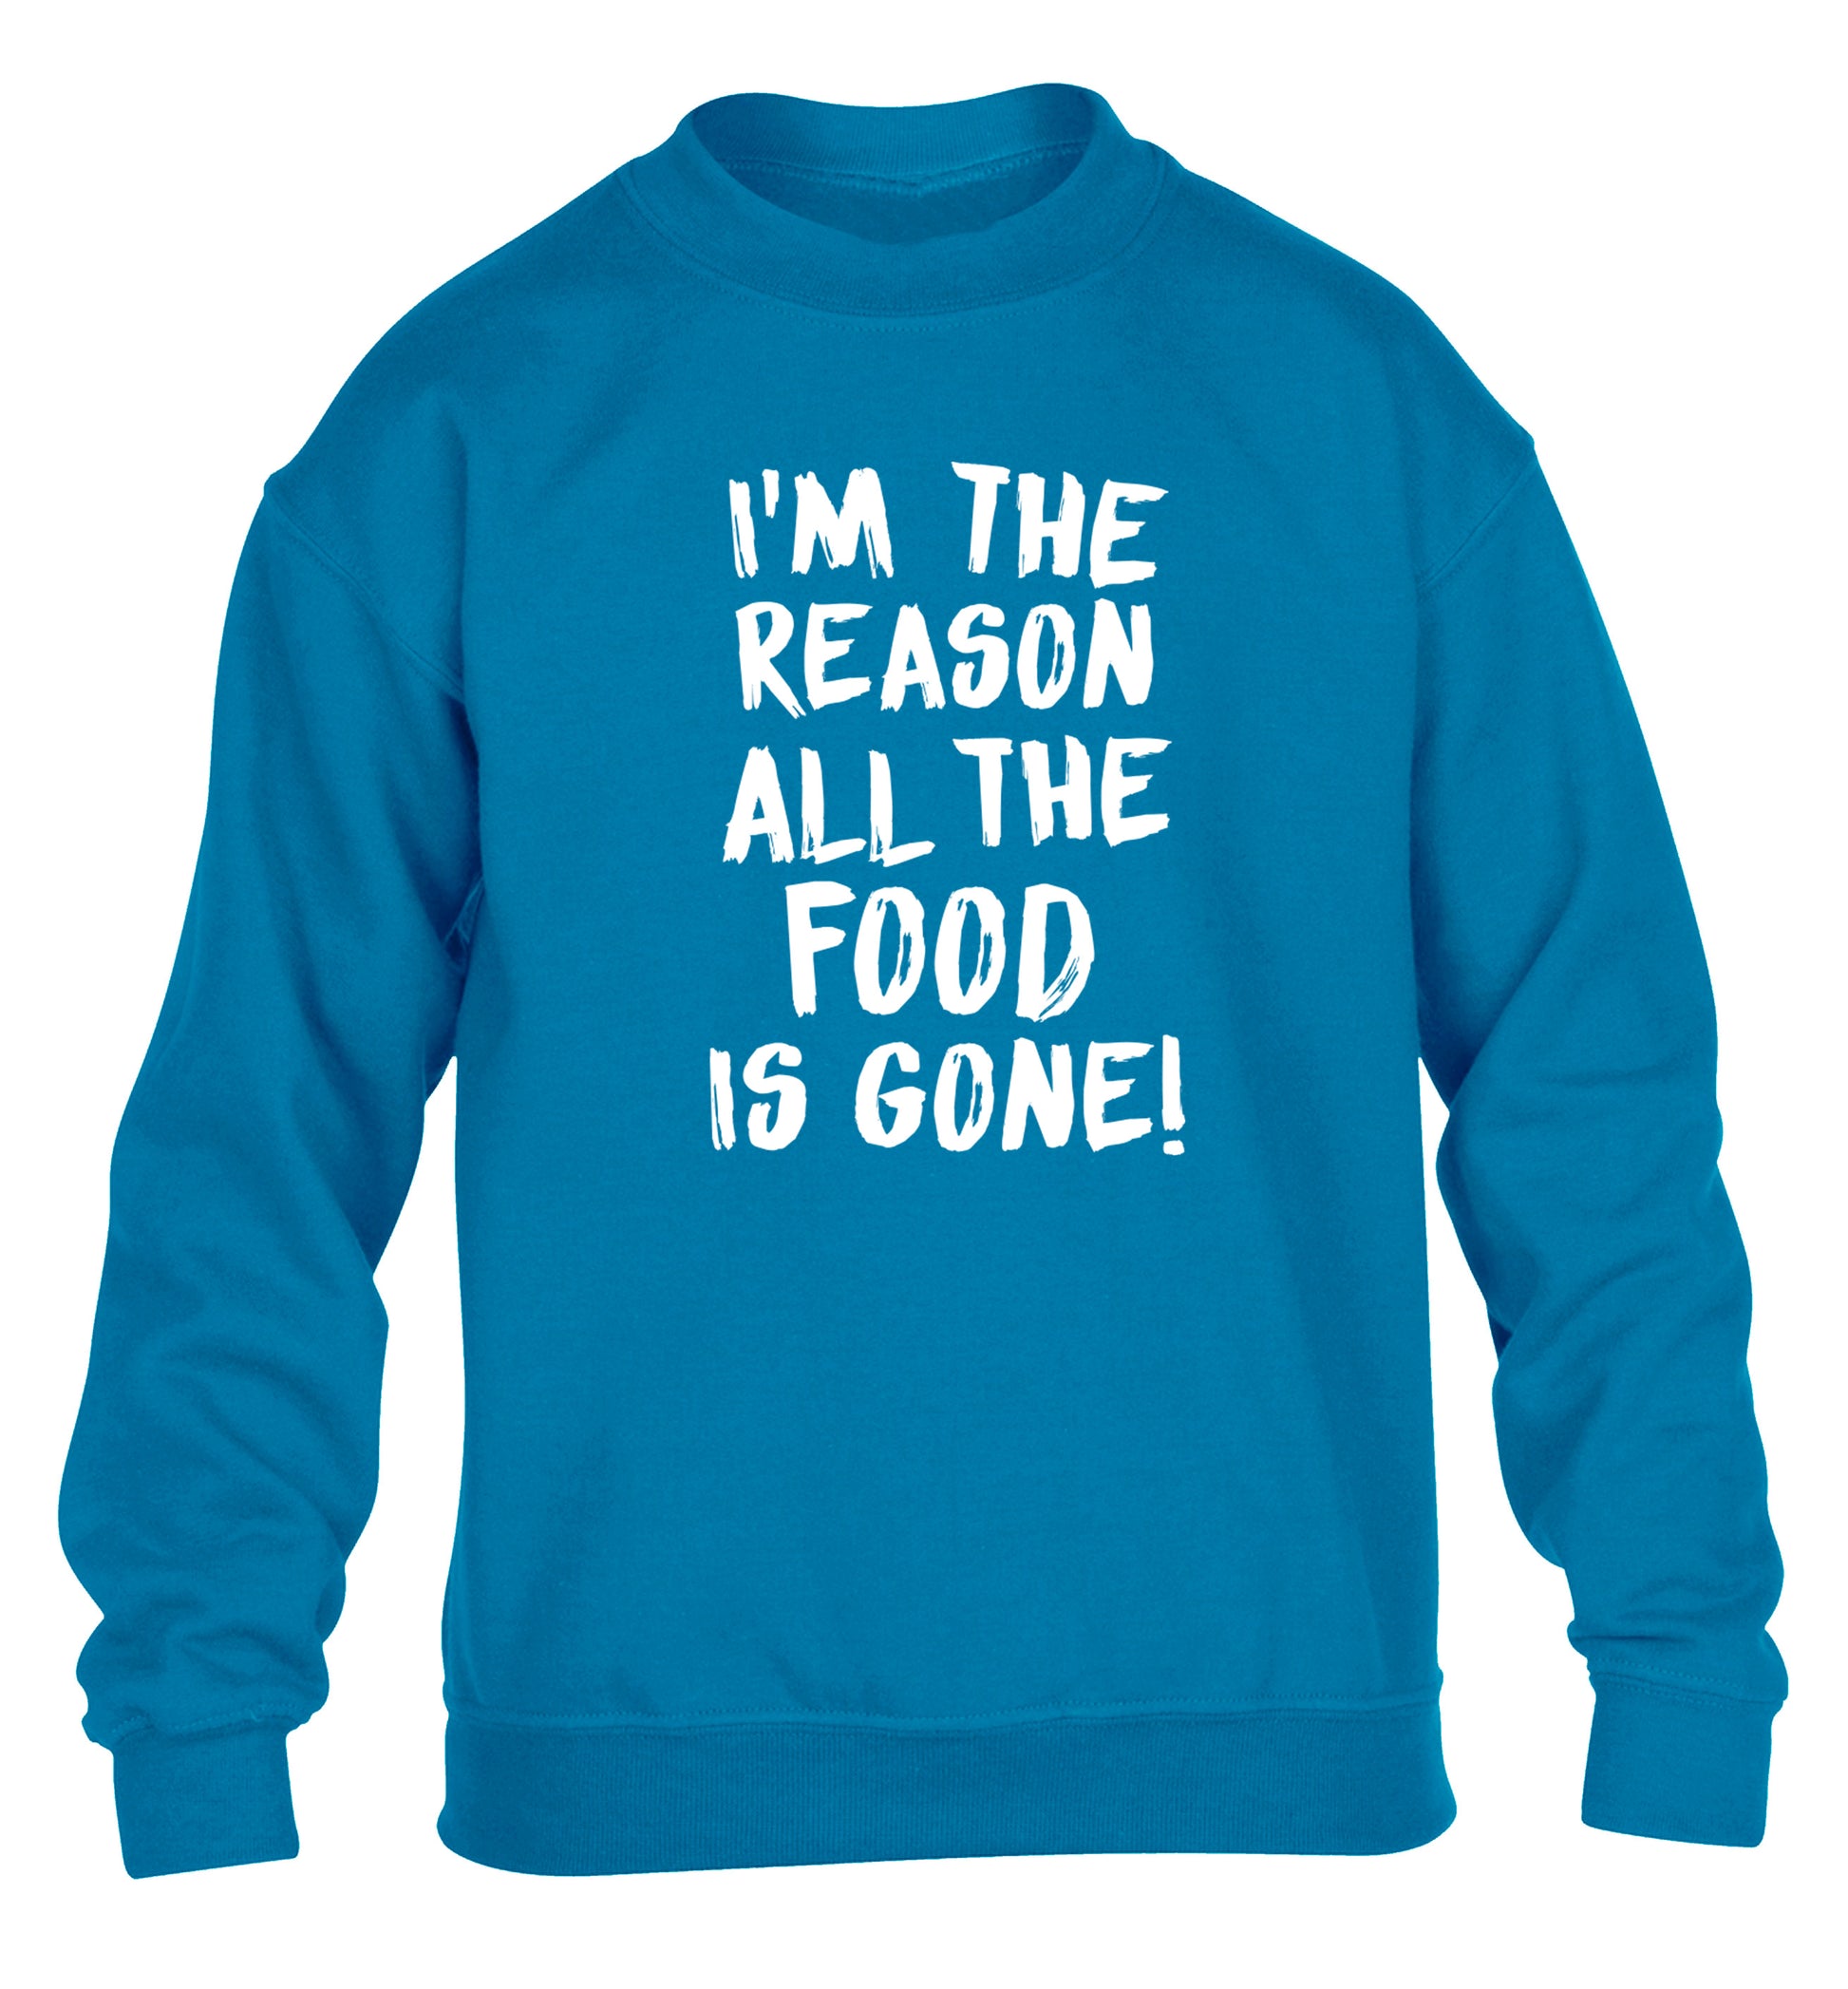 I'm the reason why all the food is gone children's blue sweater 12-13 Years